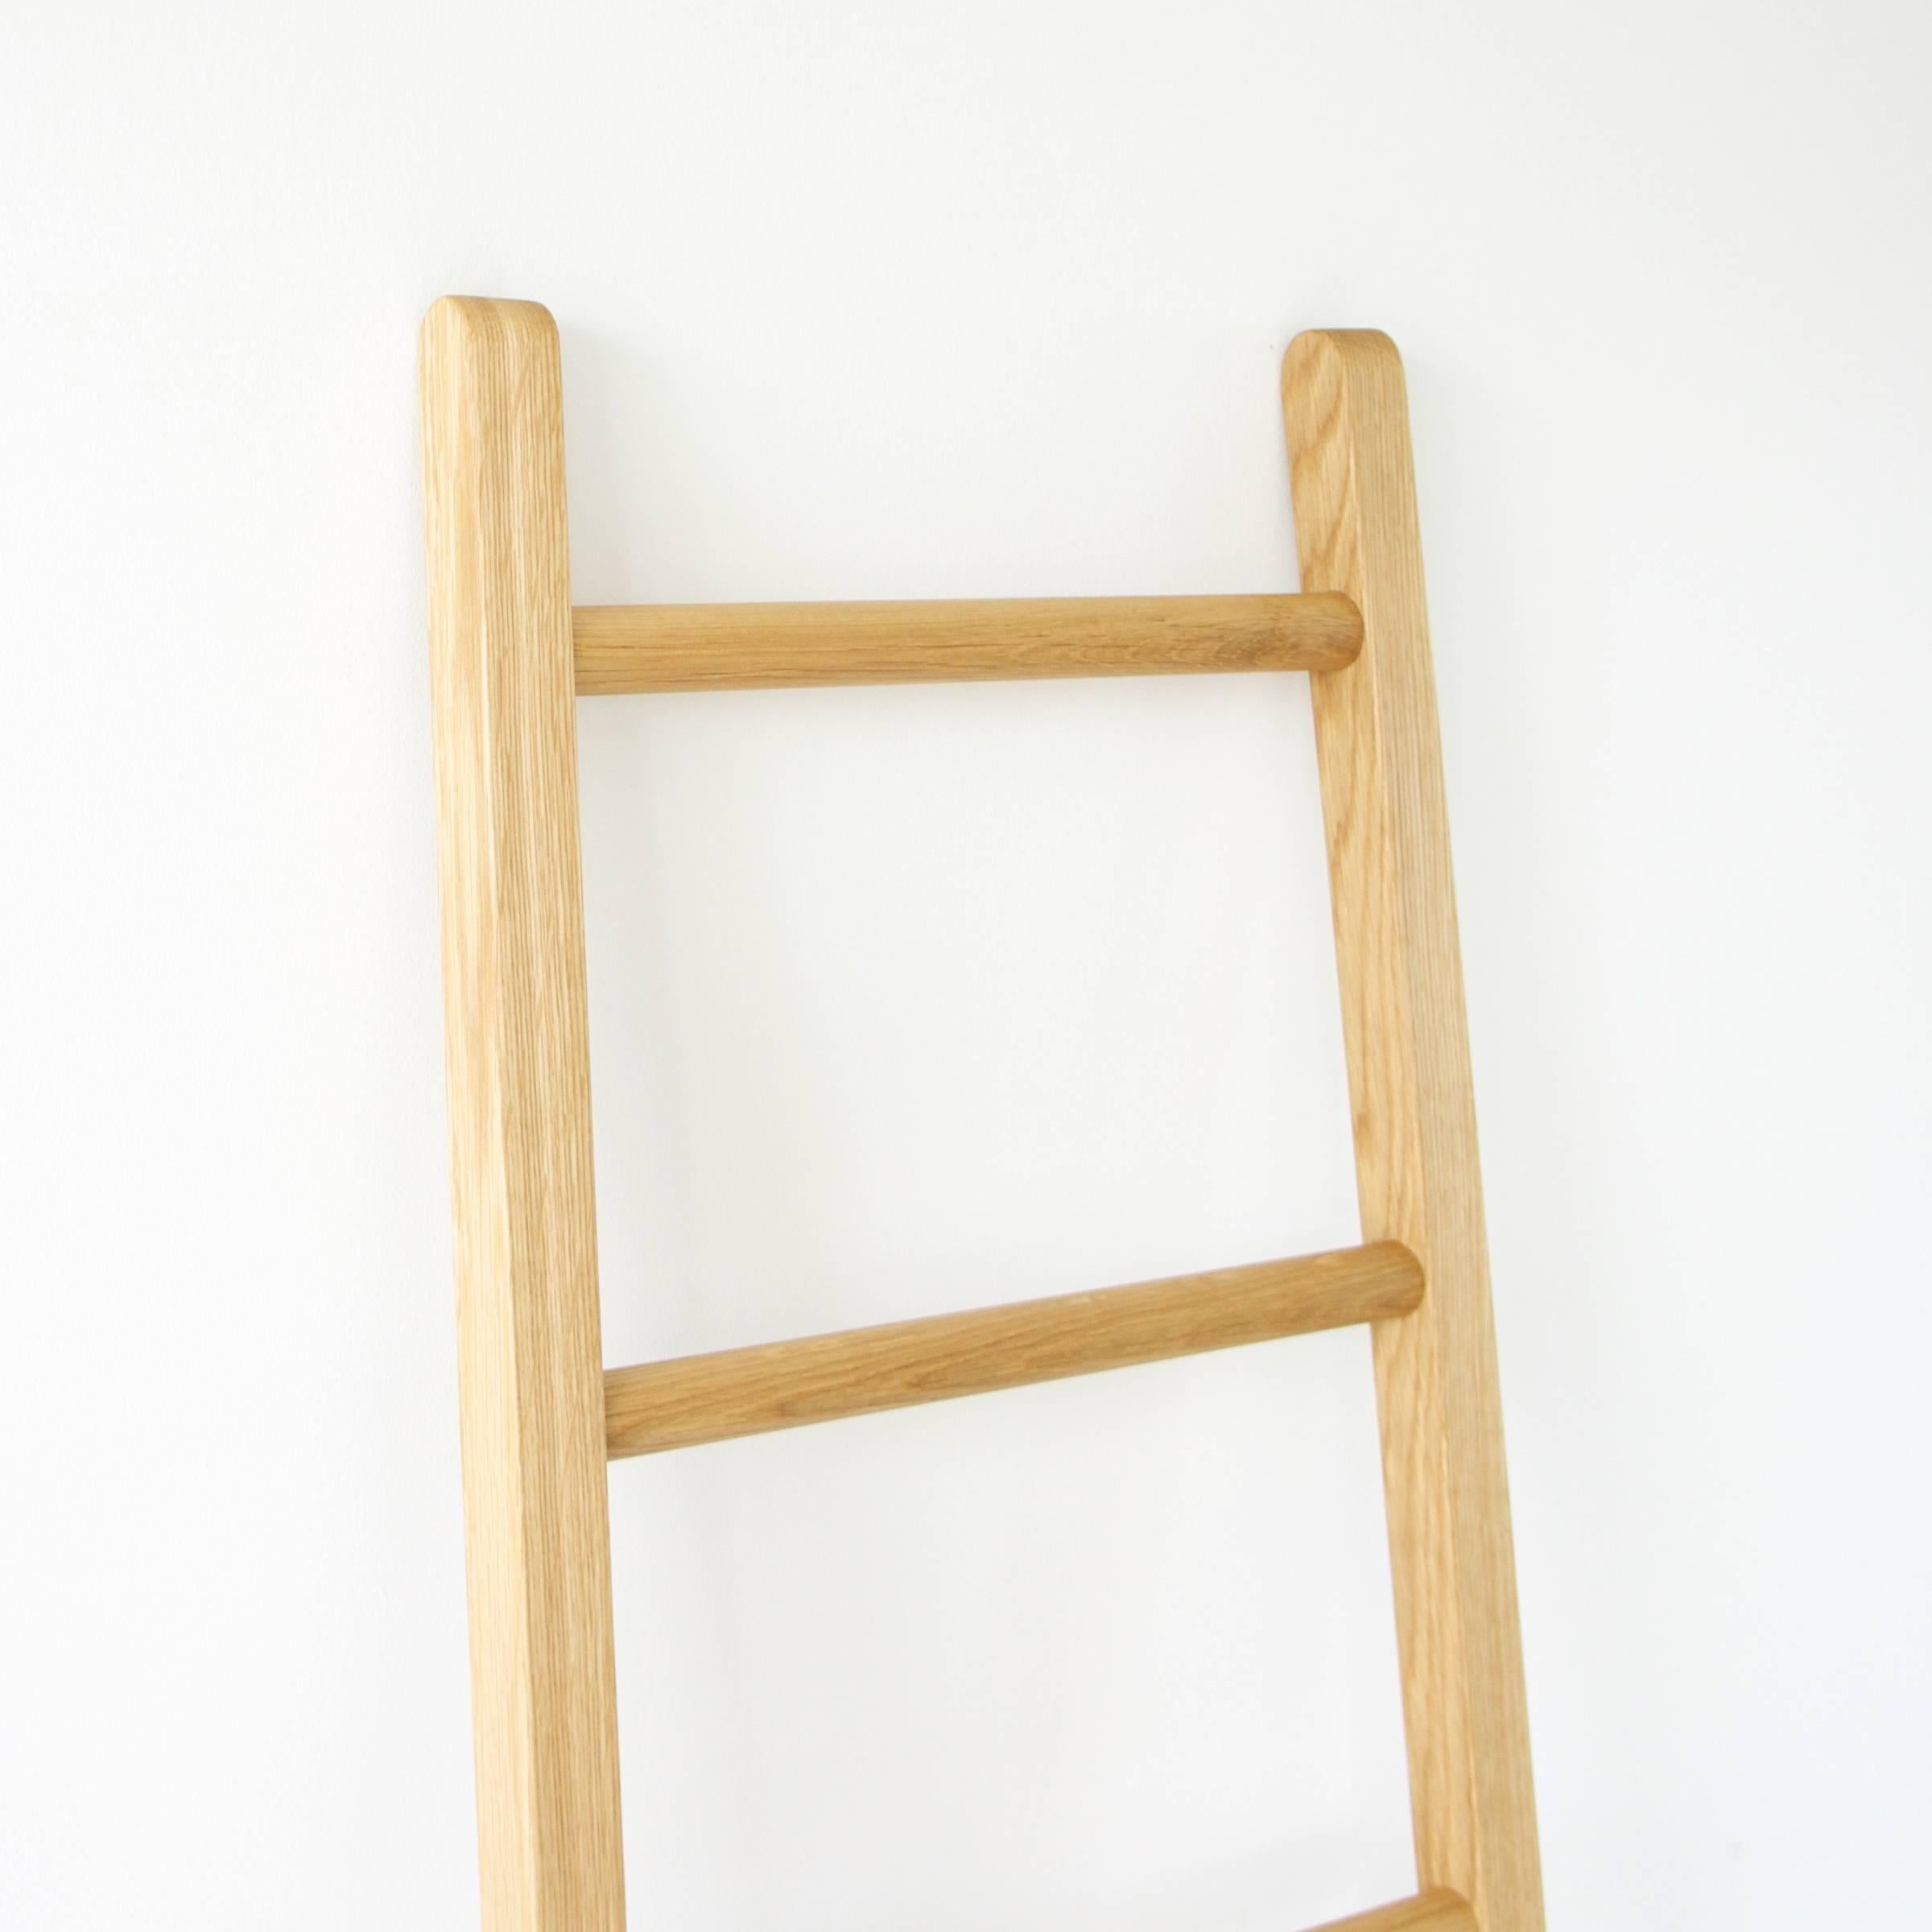 A solid white oak towel ladder with some unique design elements. Built incredibly strong with mortise and tenon joinery and hand finished with a low voc oil and wax.
 